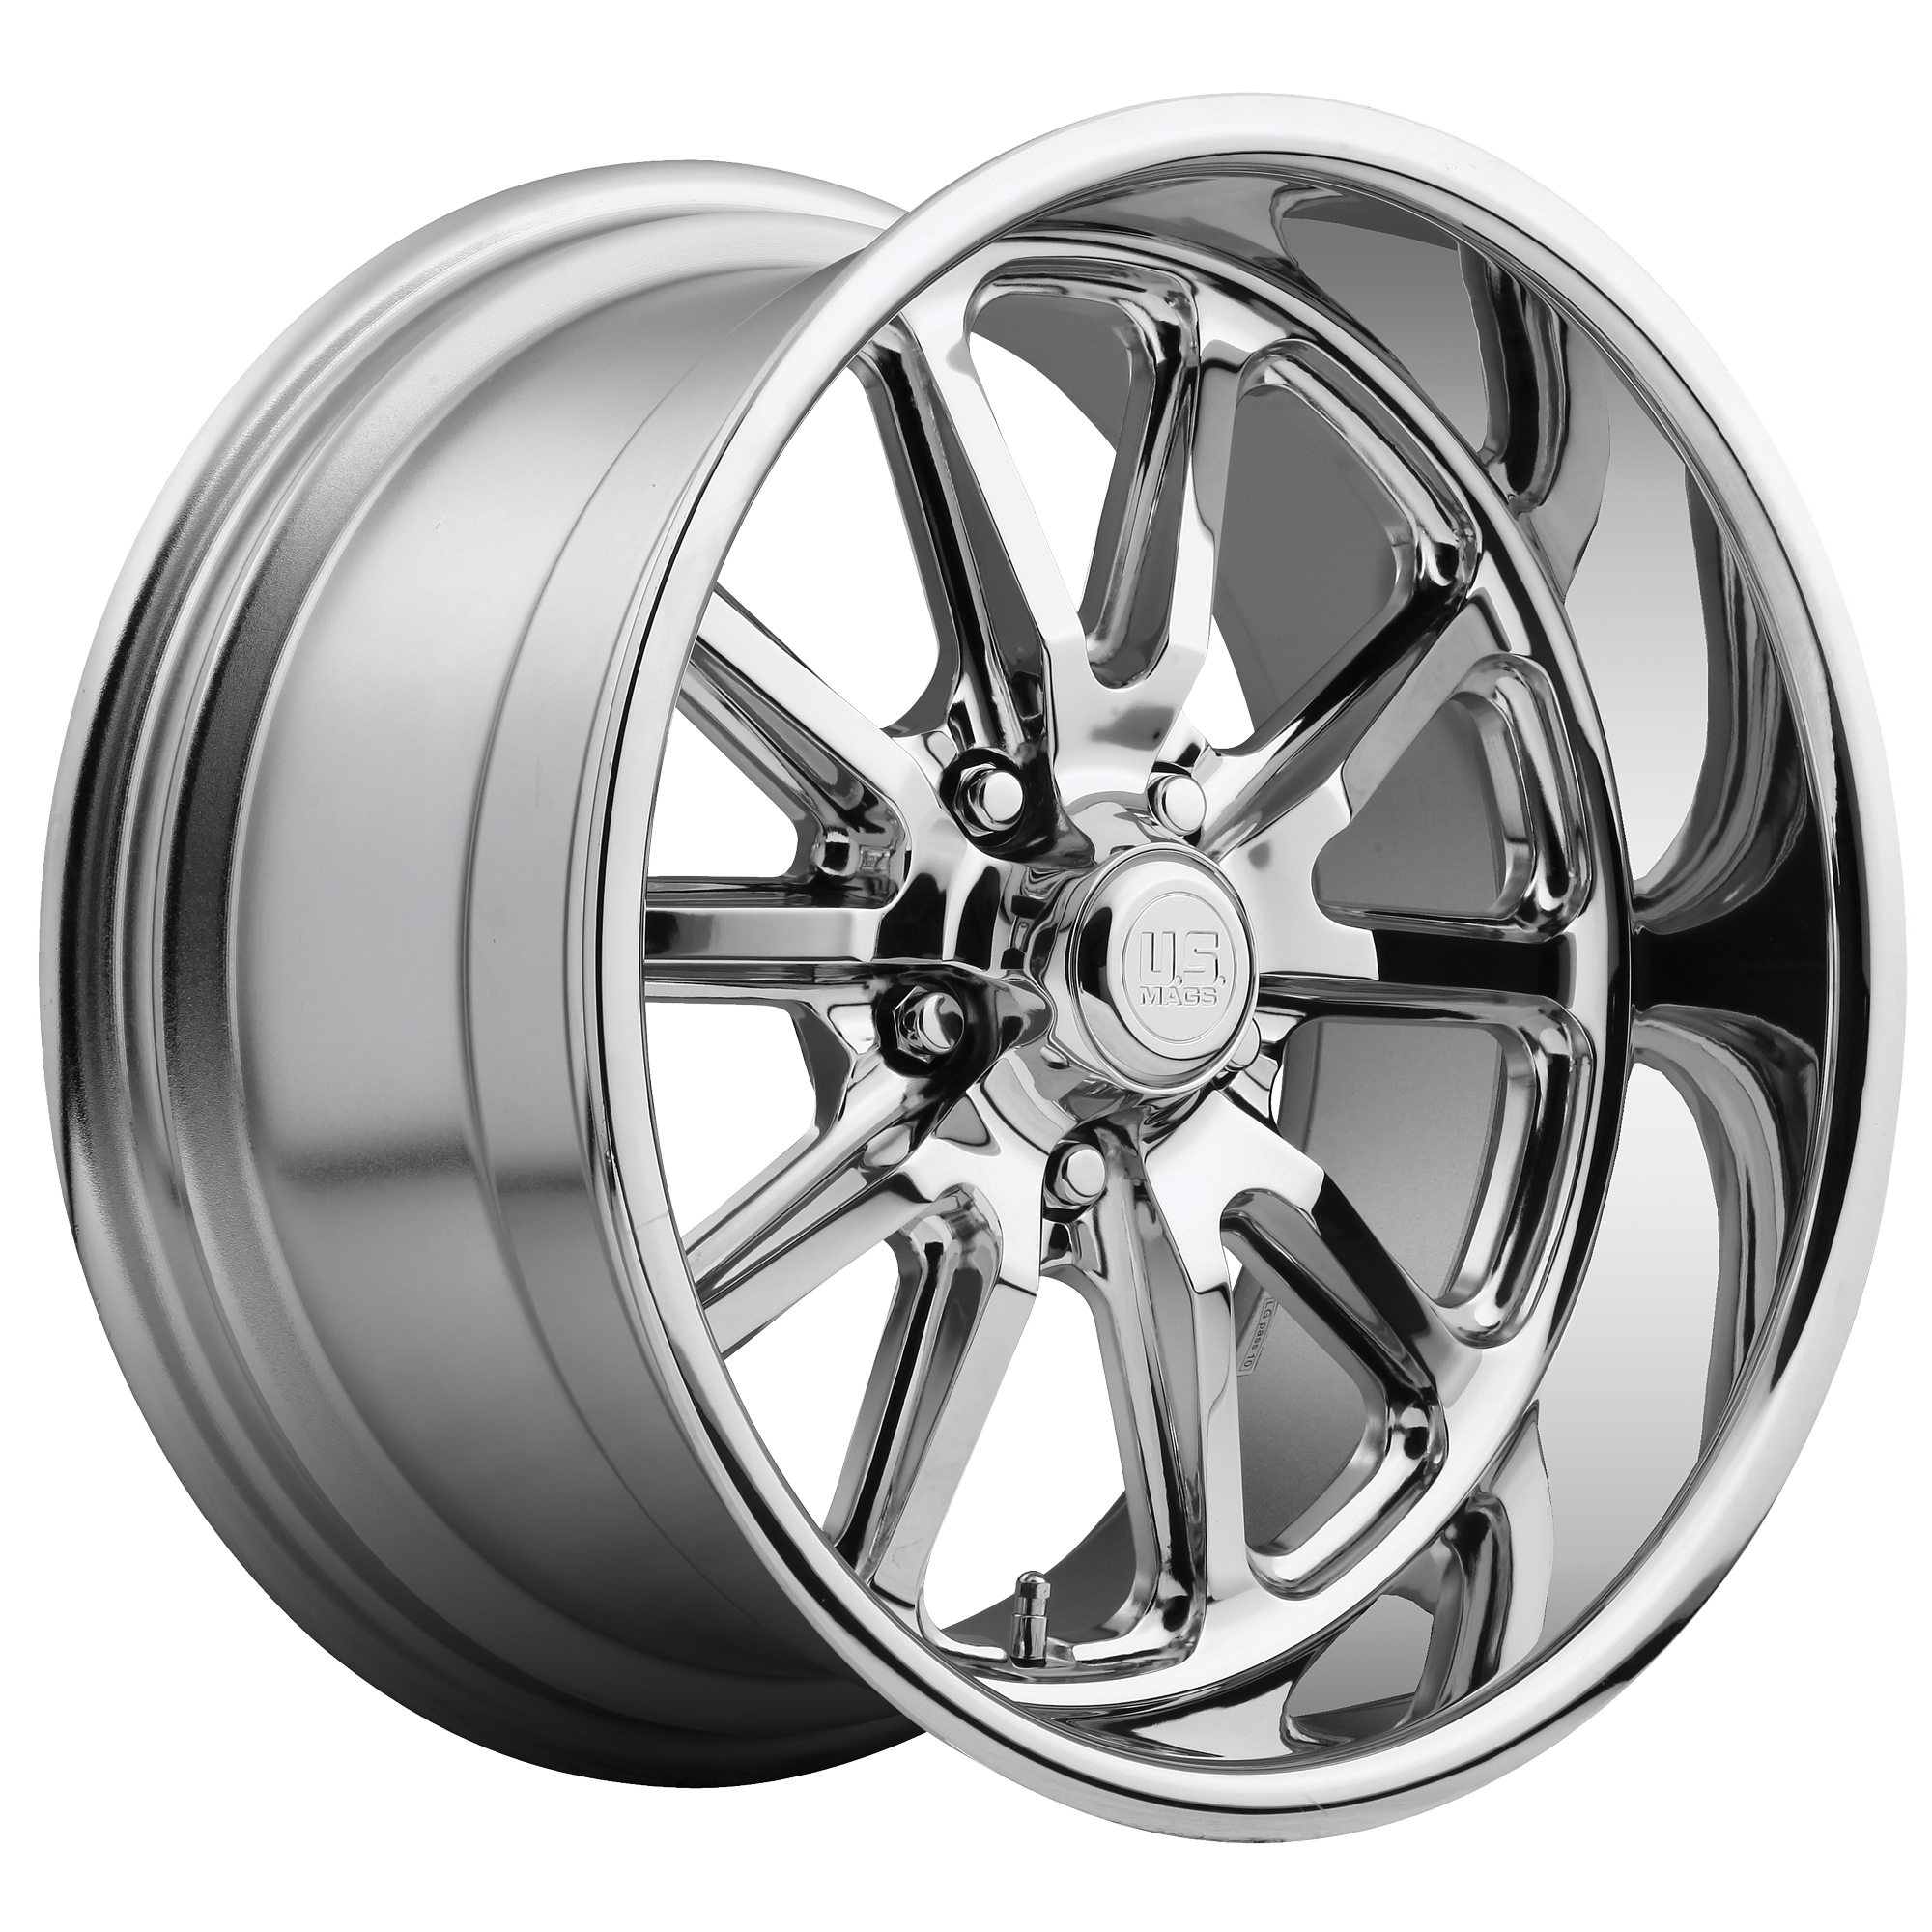 RAMBLER 17x7 5x114.30 CHROME PLATED (1 mm) - Tires and Engine Performance